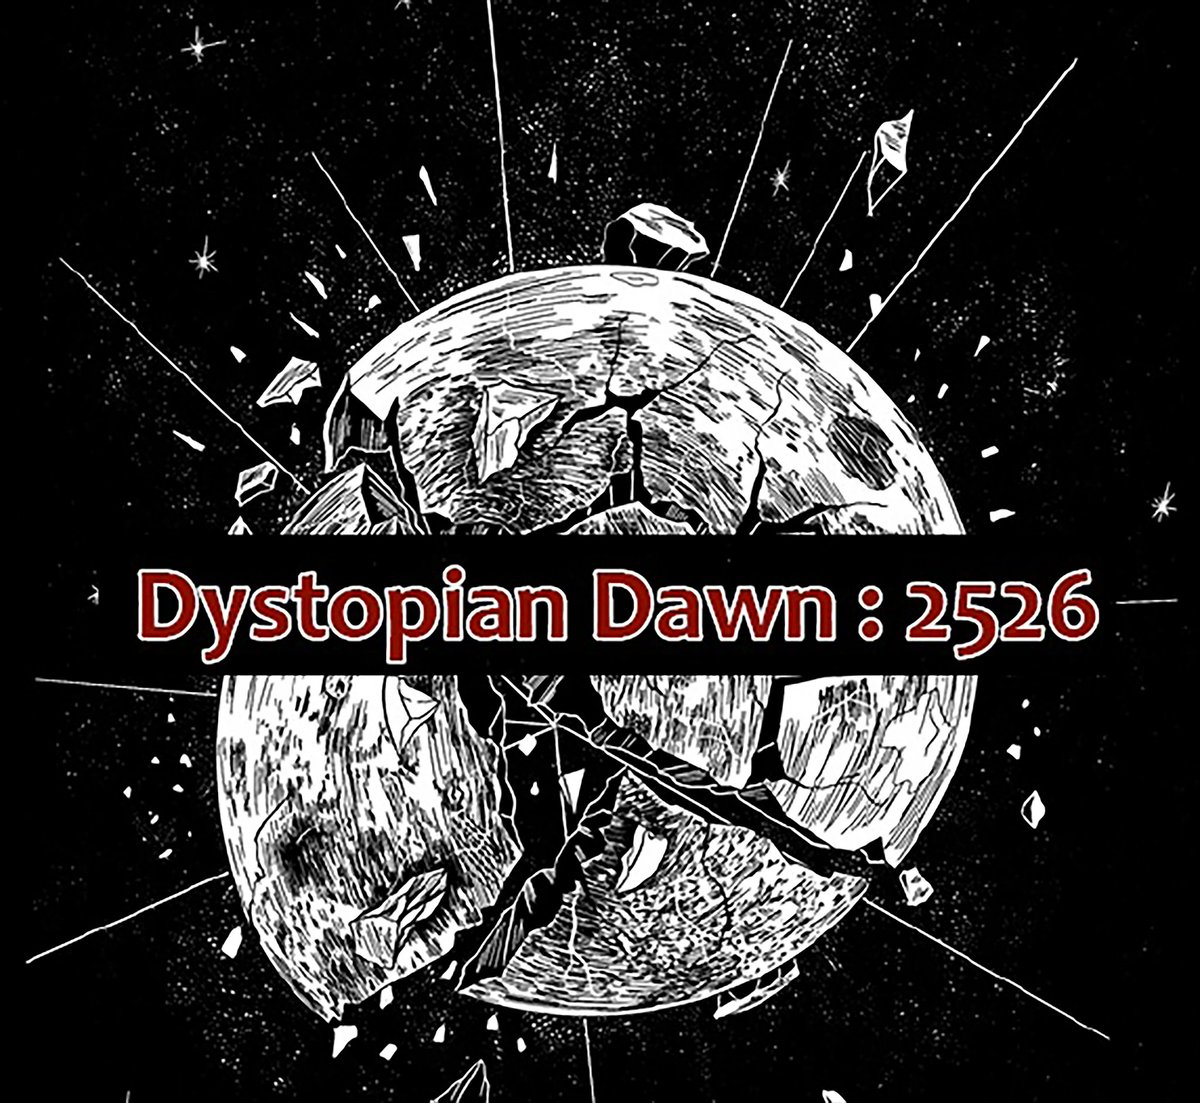 Well, I played in a game of dystopian dawn with @Dystopian_Dawn himself yesterday. I think the game went pretty well. Last minute reminder that you can still back the kickstarter for the next two days. #ttrpg #ttrpgcommunity